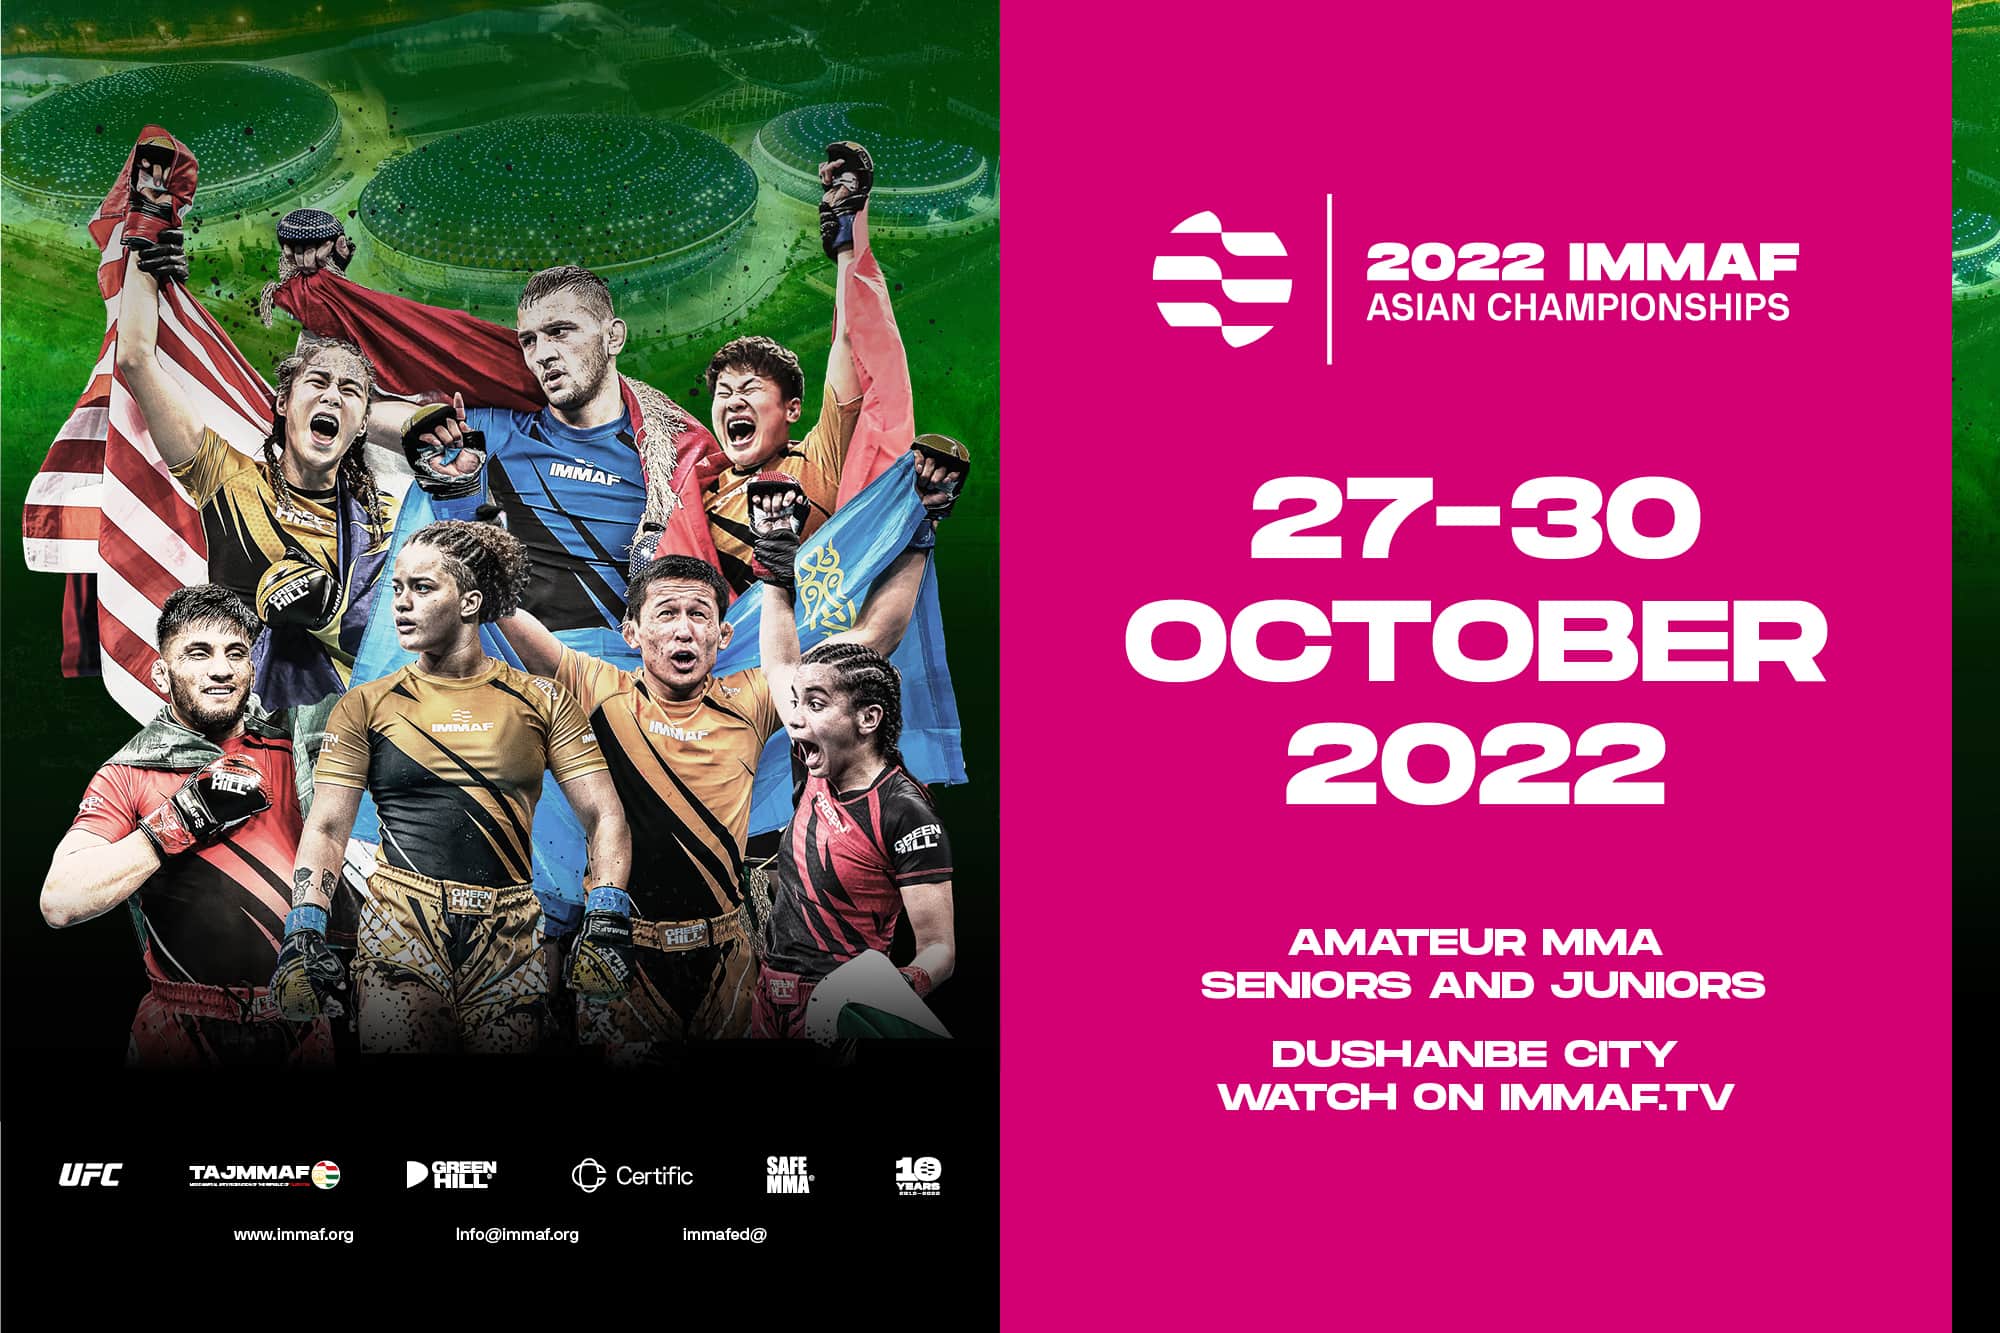 IMMAF TV to broadcast 2022 IMMAF Asian Championships